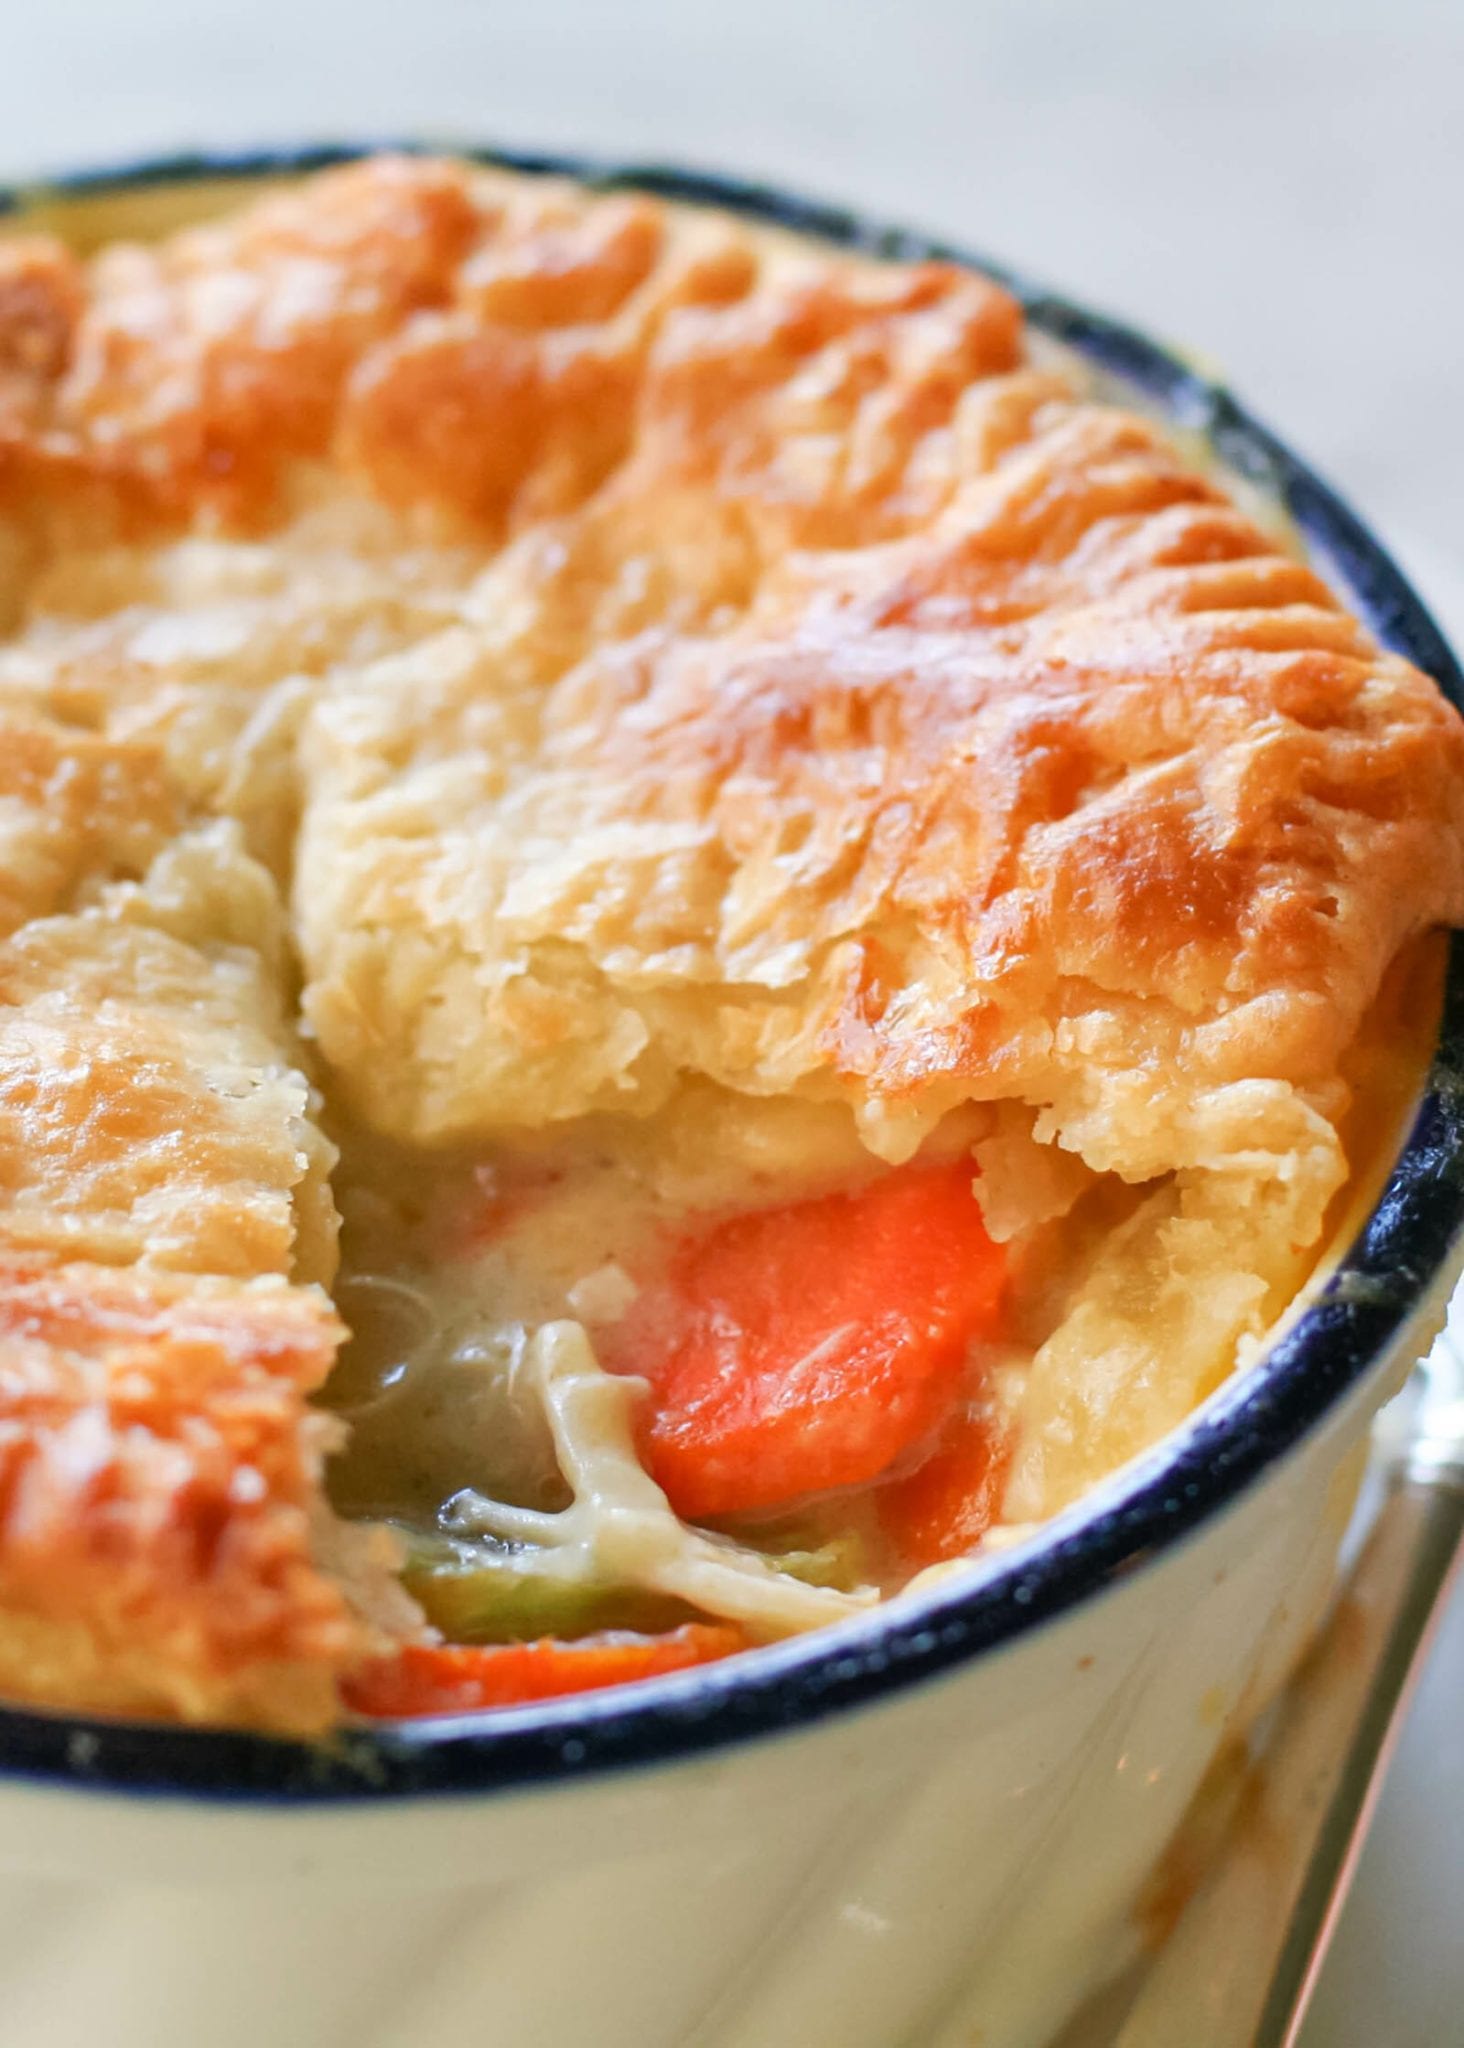 A chicken pot pie with a golden crust and creamy filling is in a ramekin.